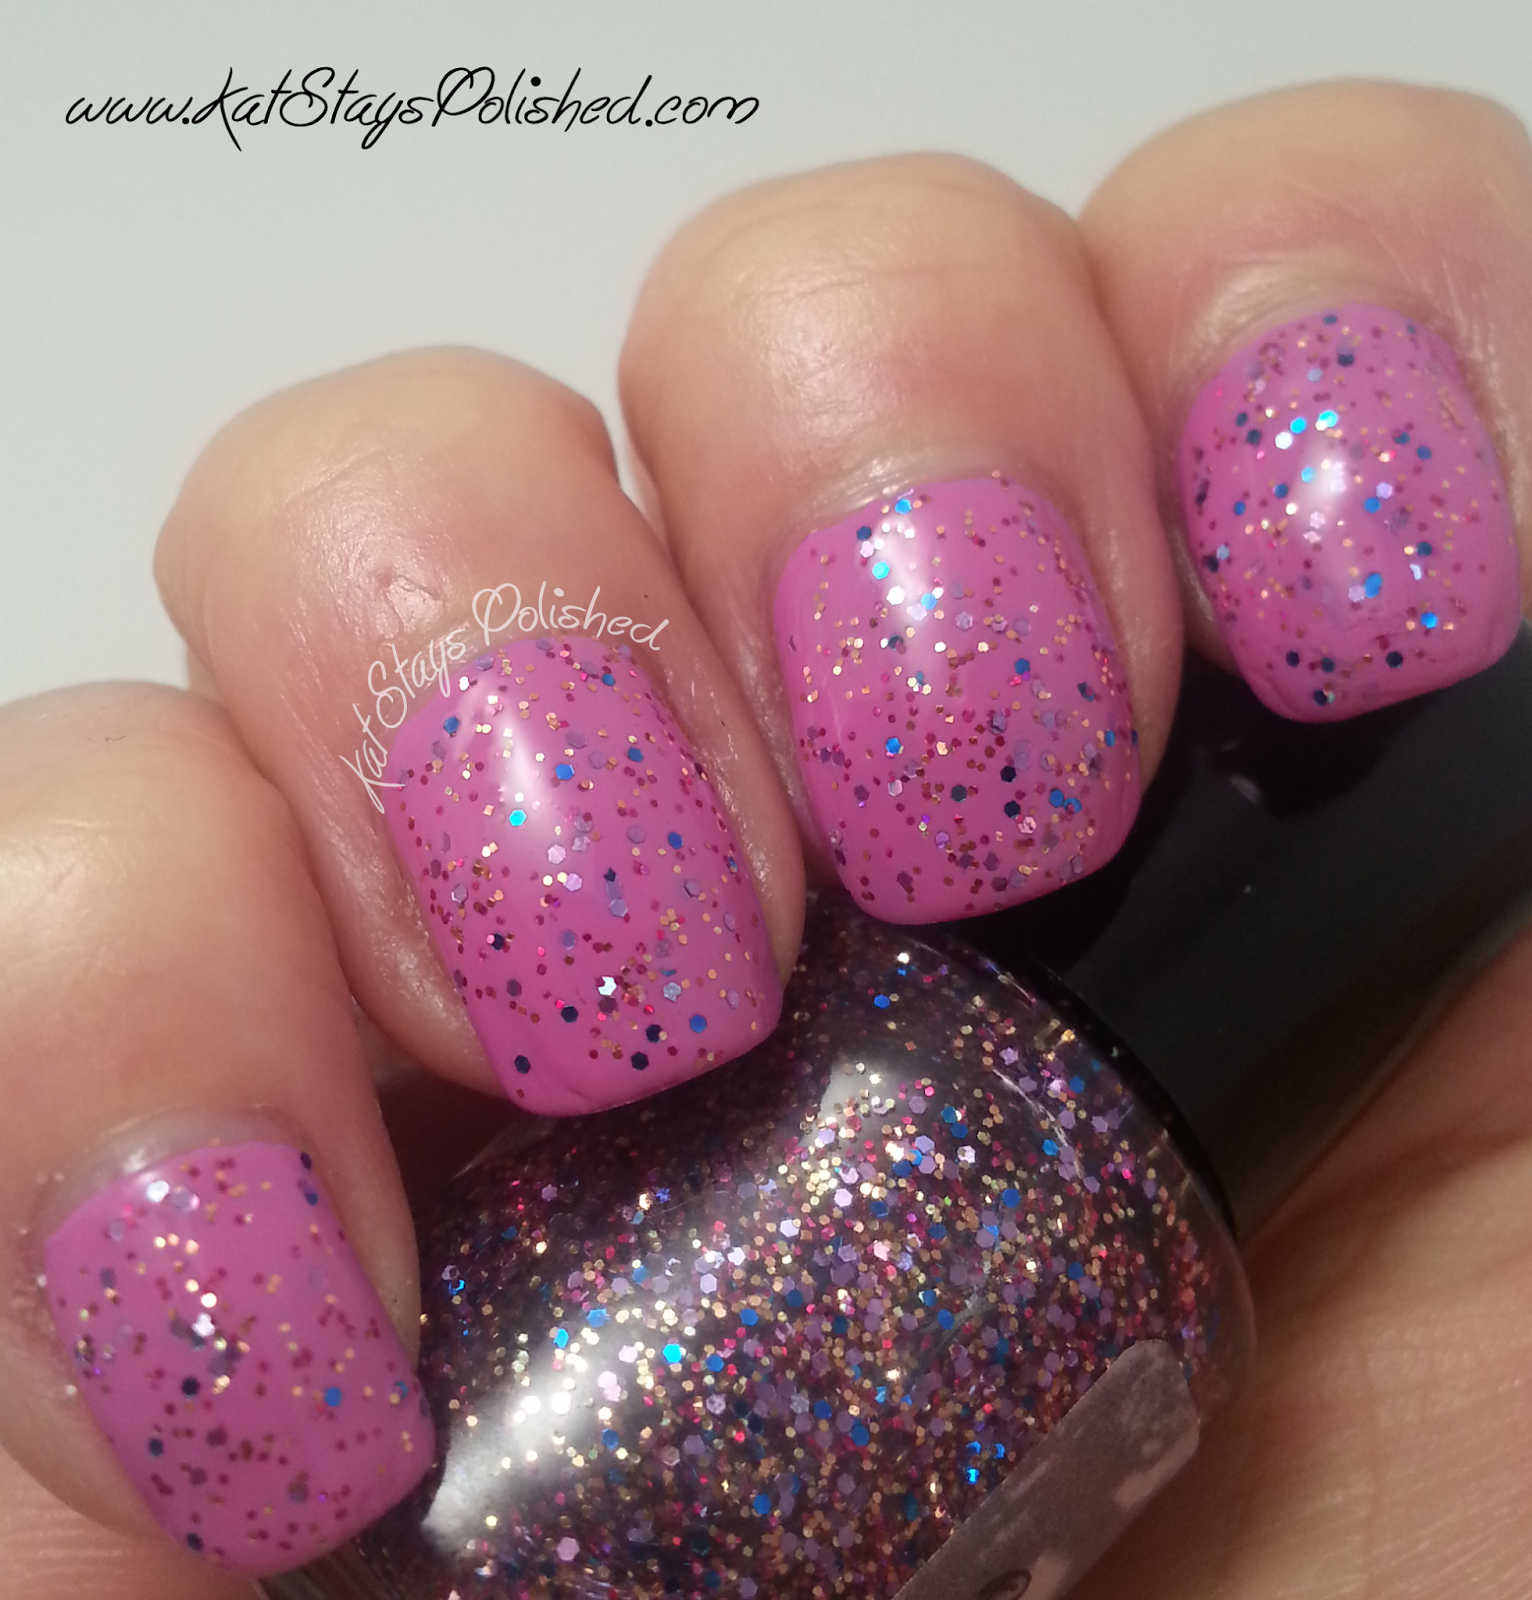 Creations by Lynda - Dance of the Pixie | Kat Stays Polished